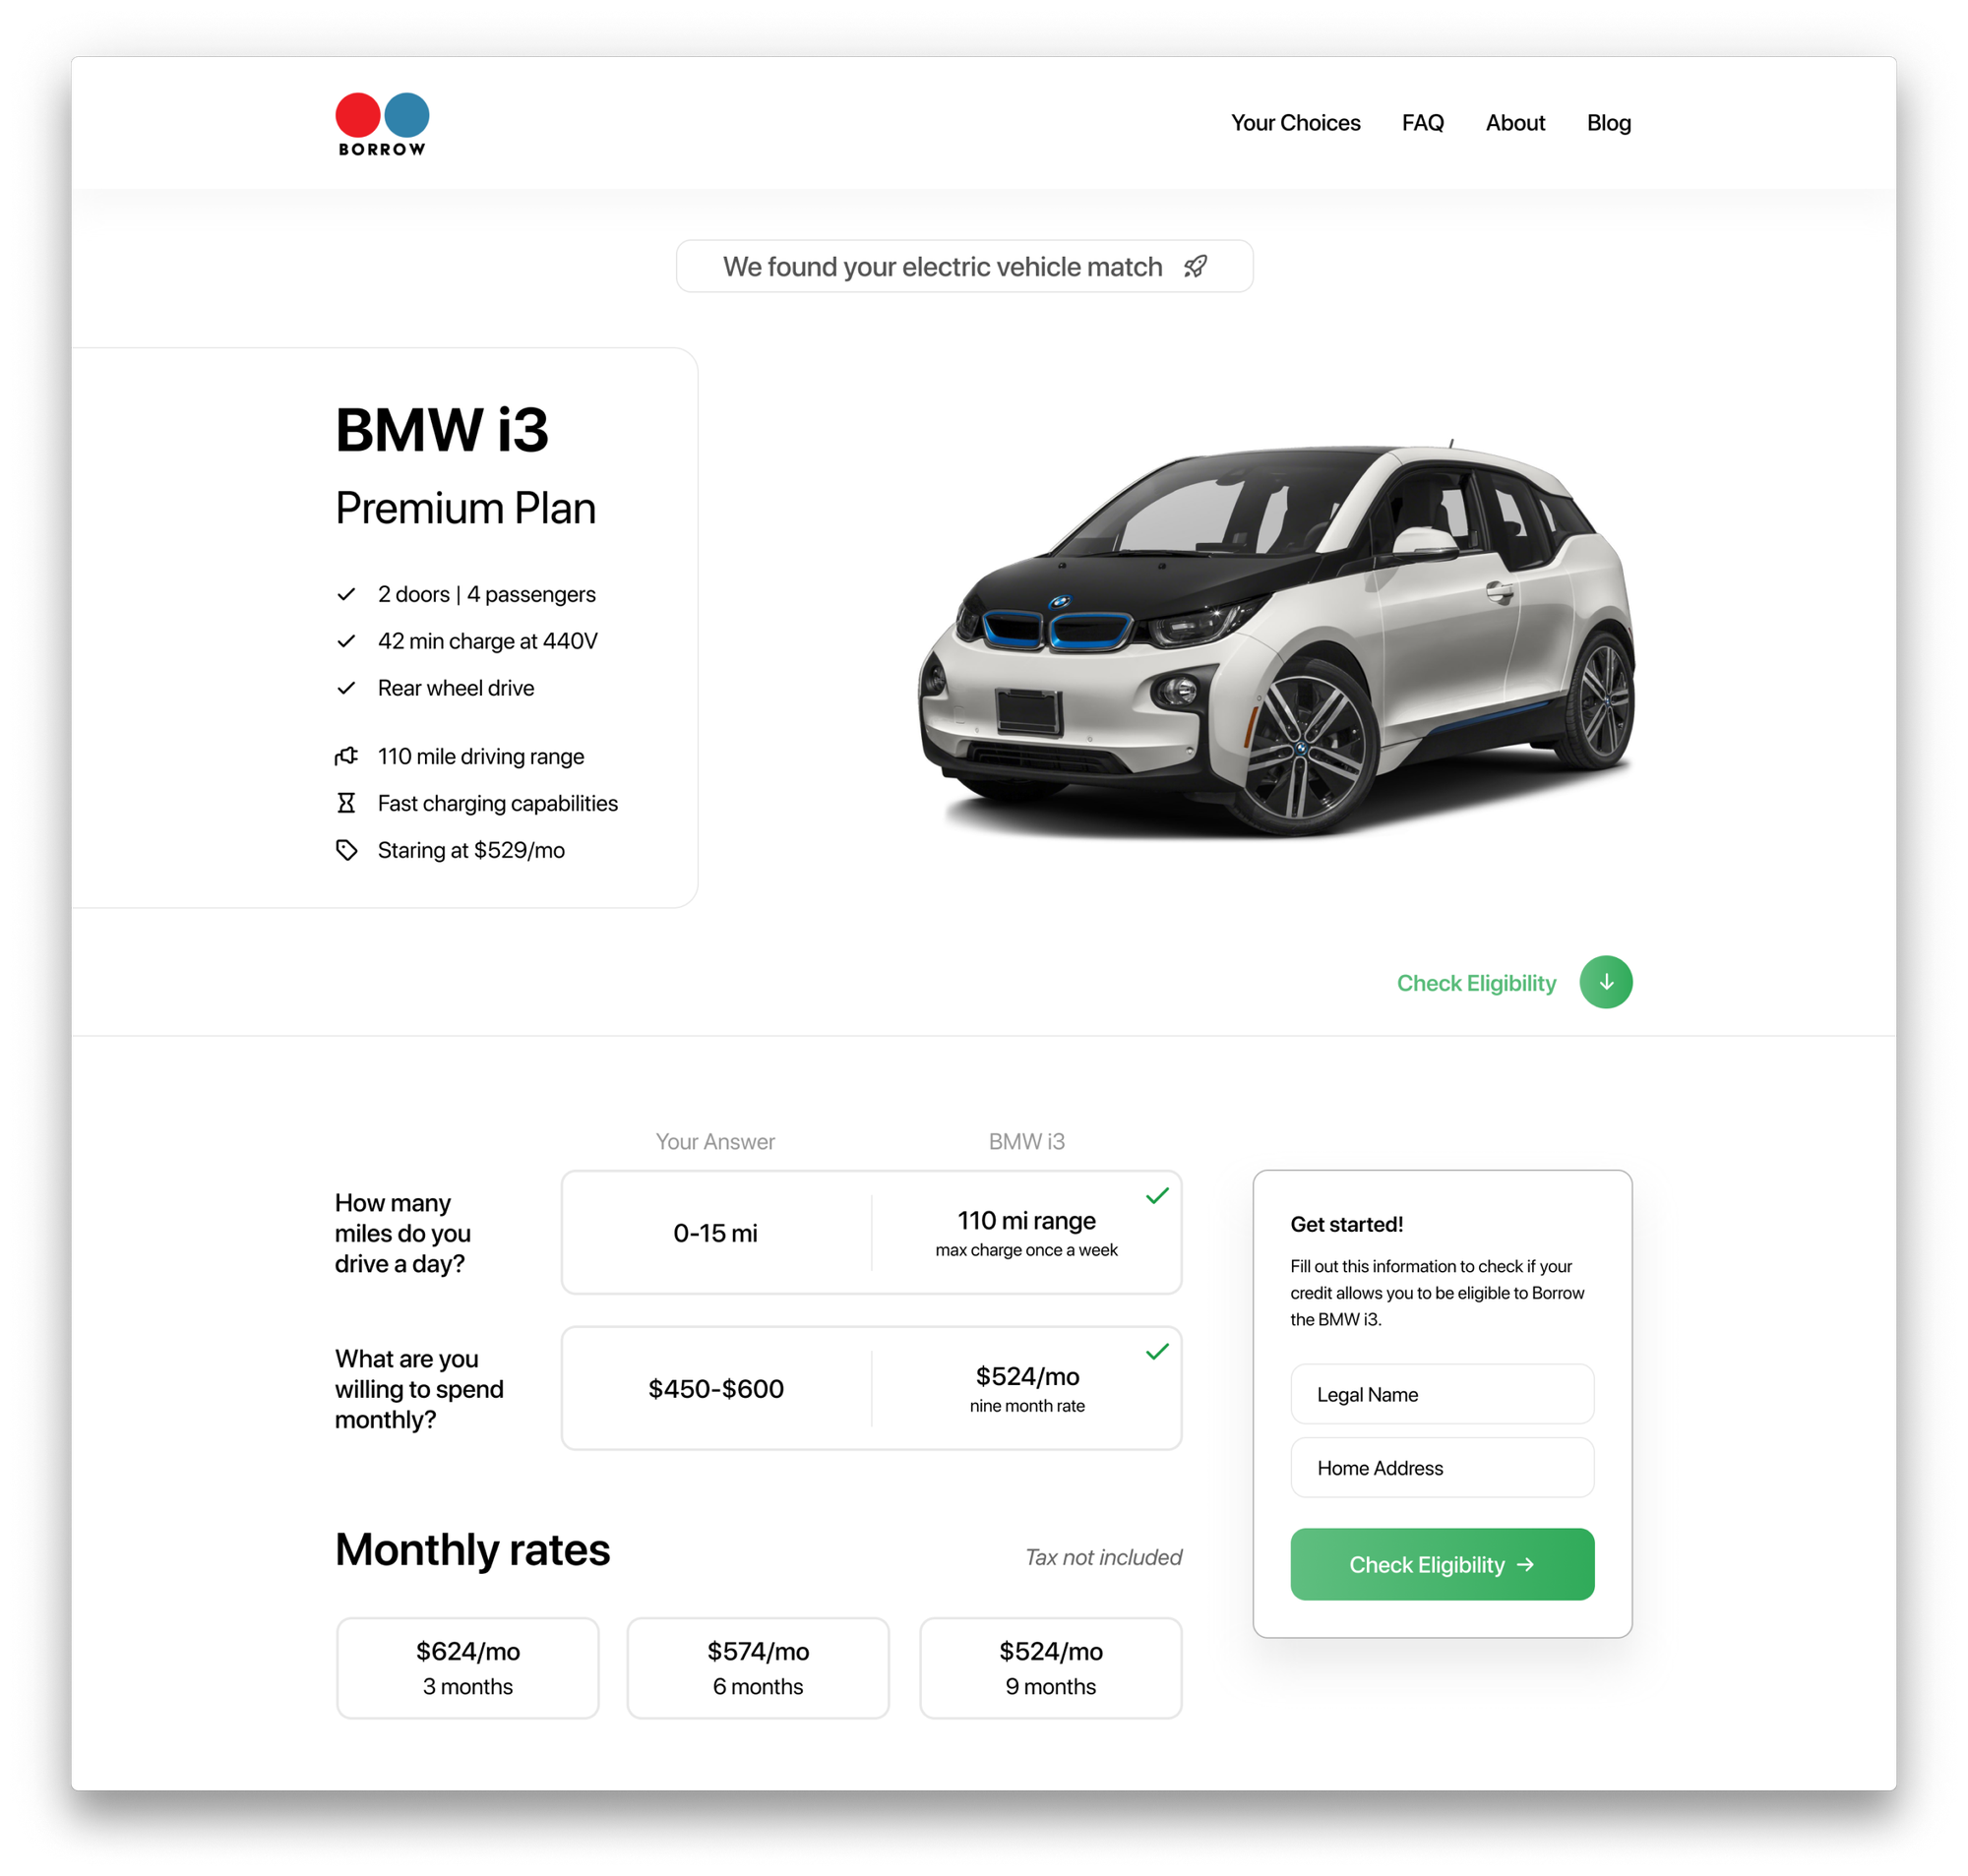 Example product page shown to user after completing the EV quiz.